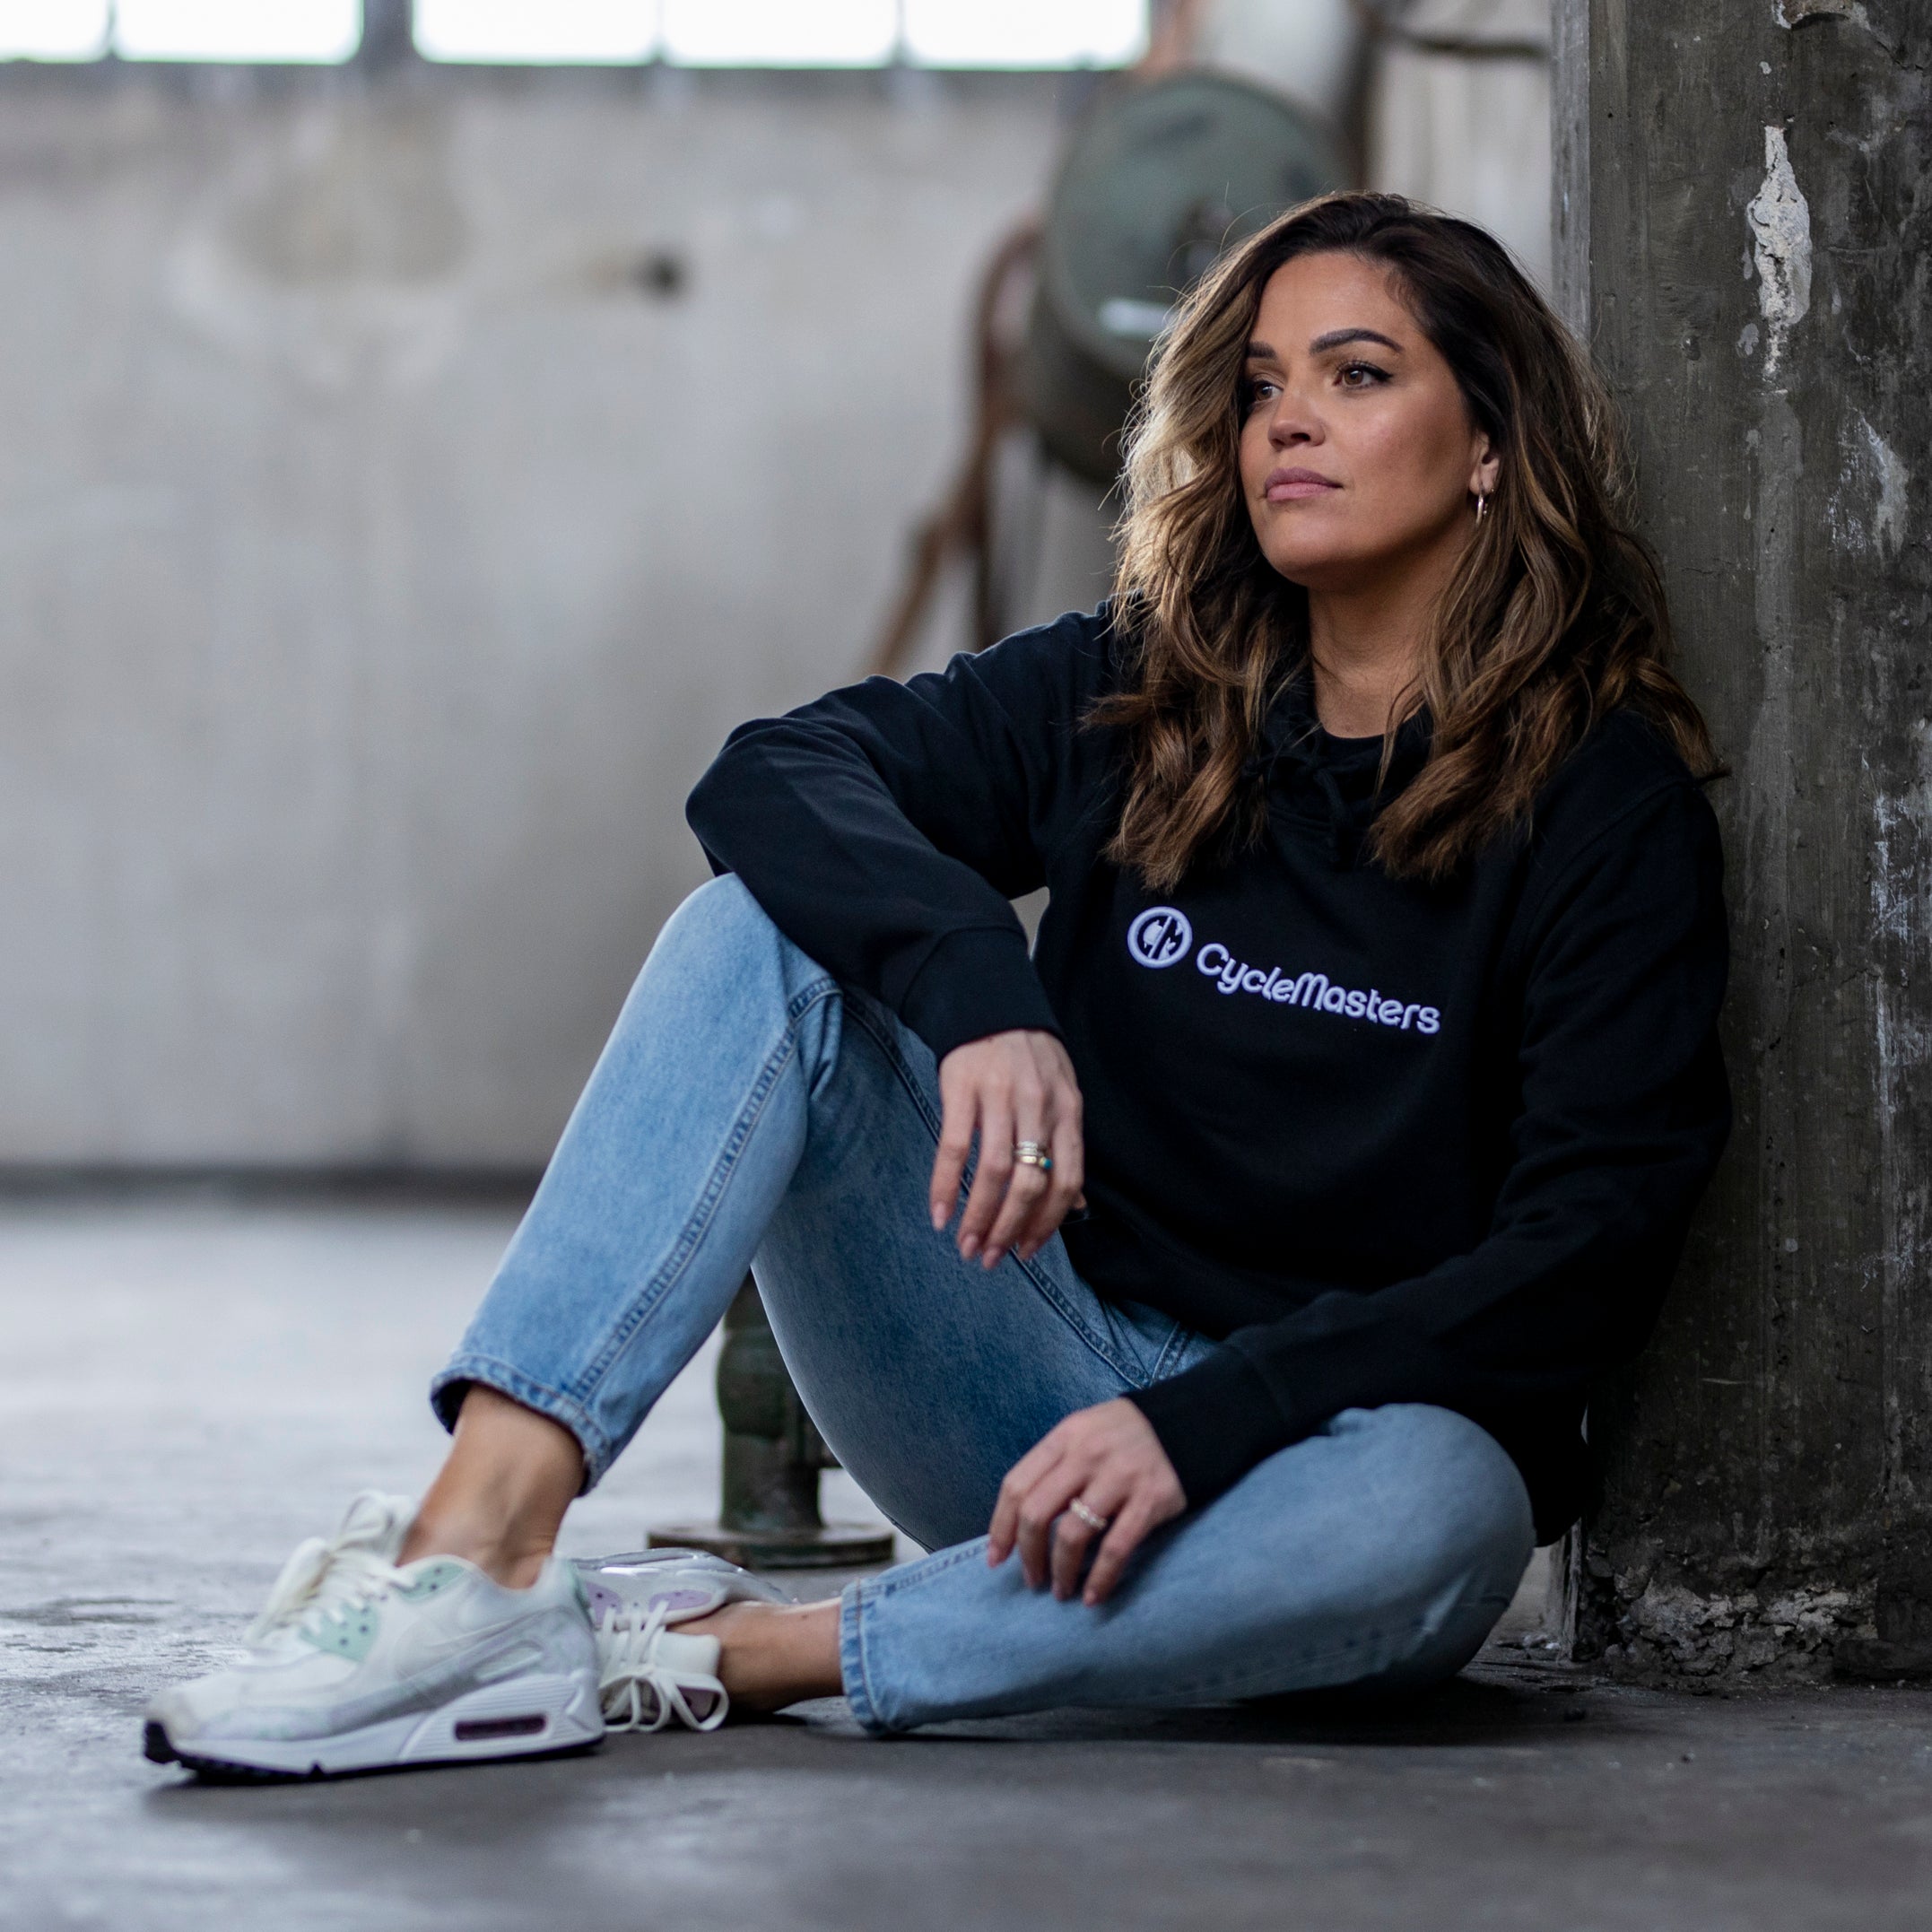 A woman wears a black CycleMasters hoodie